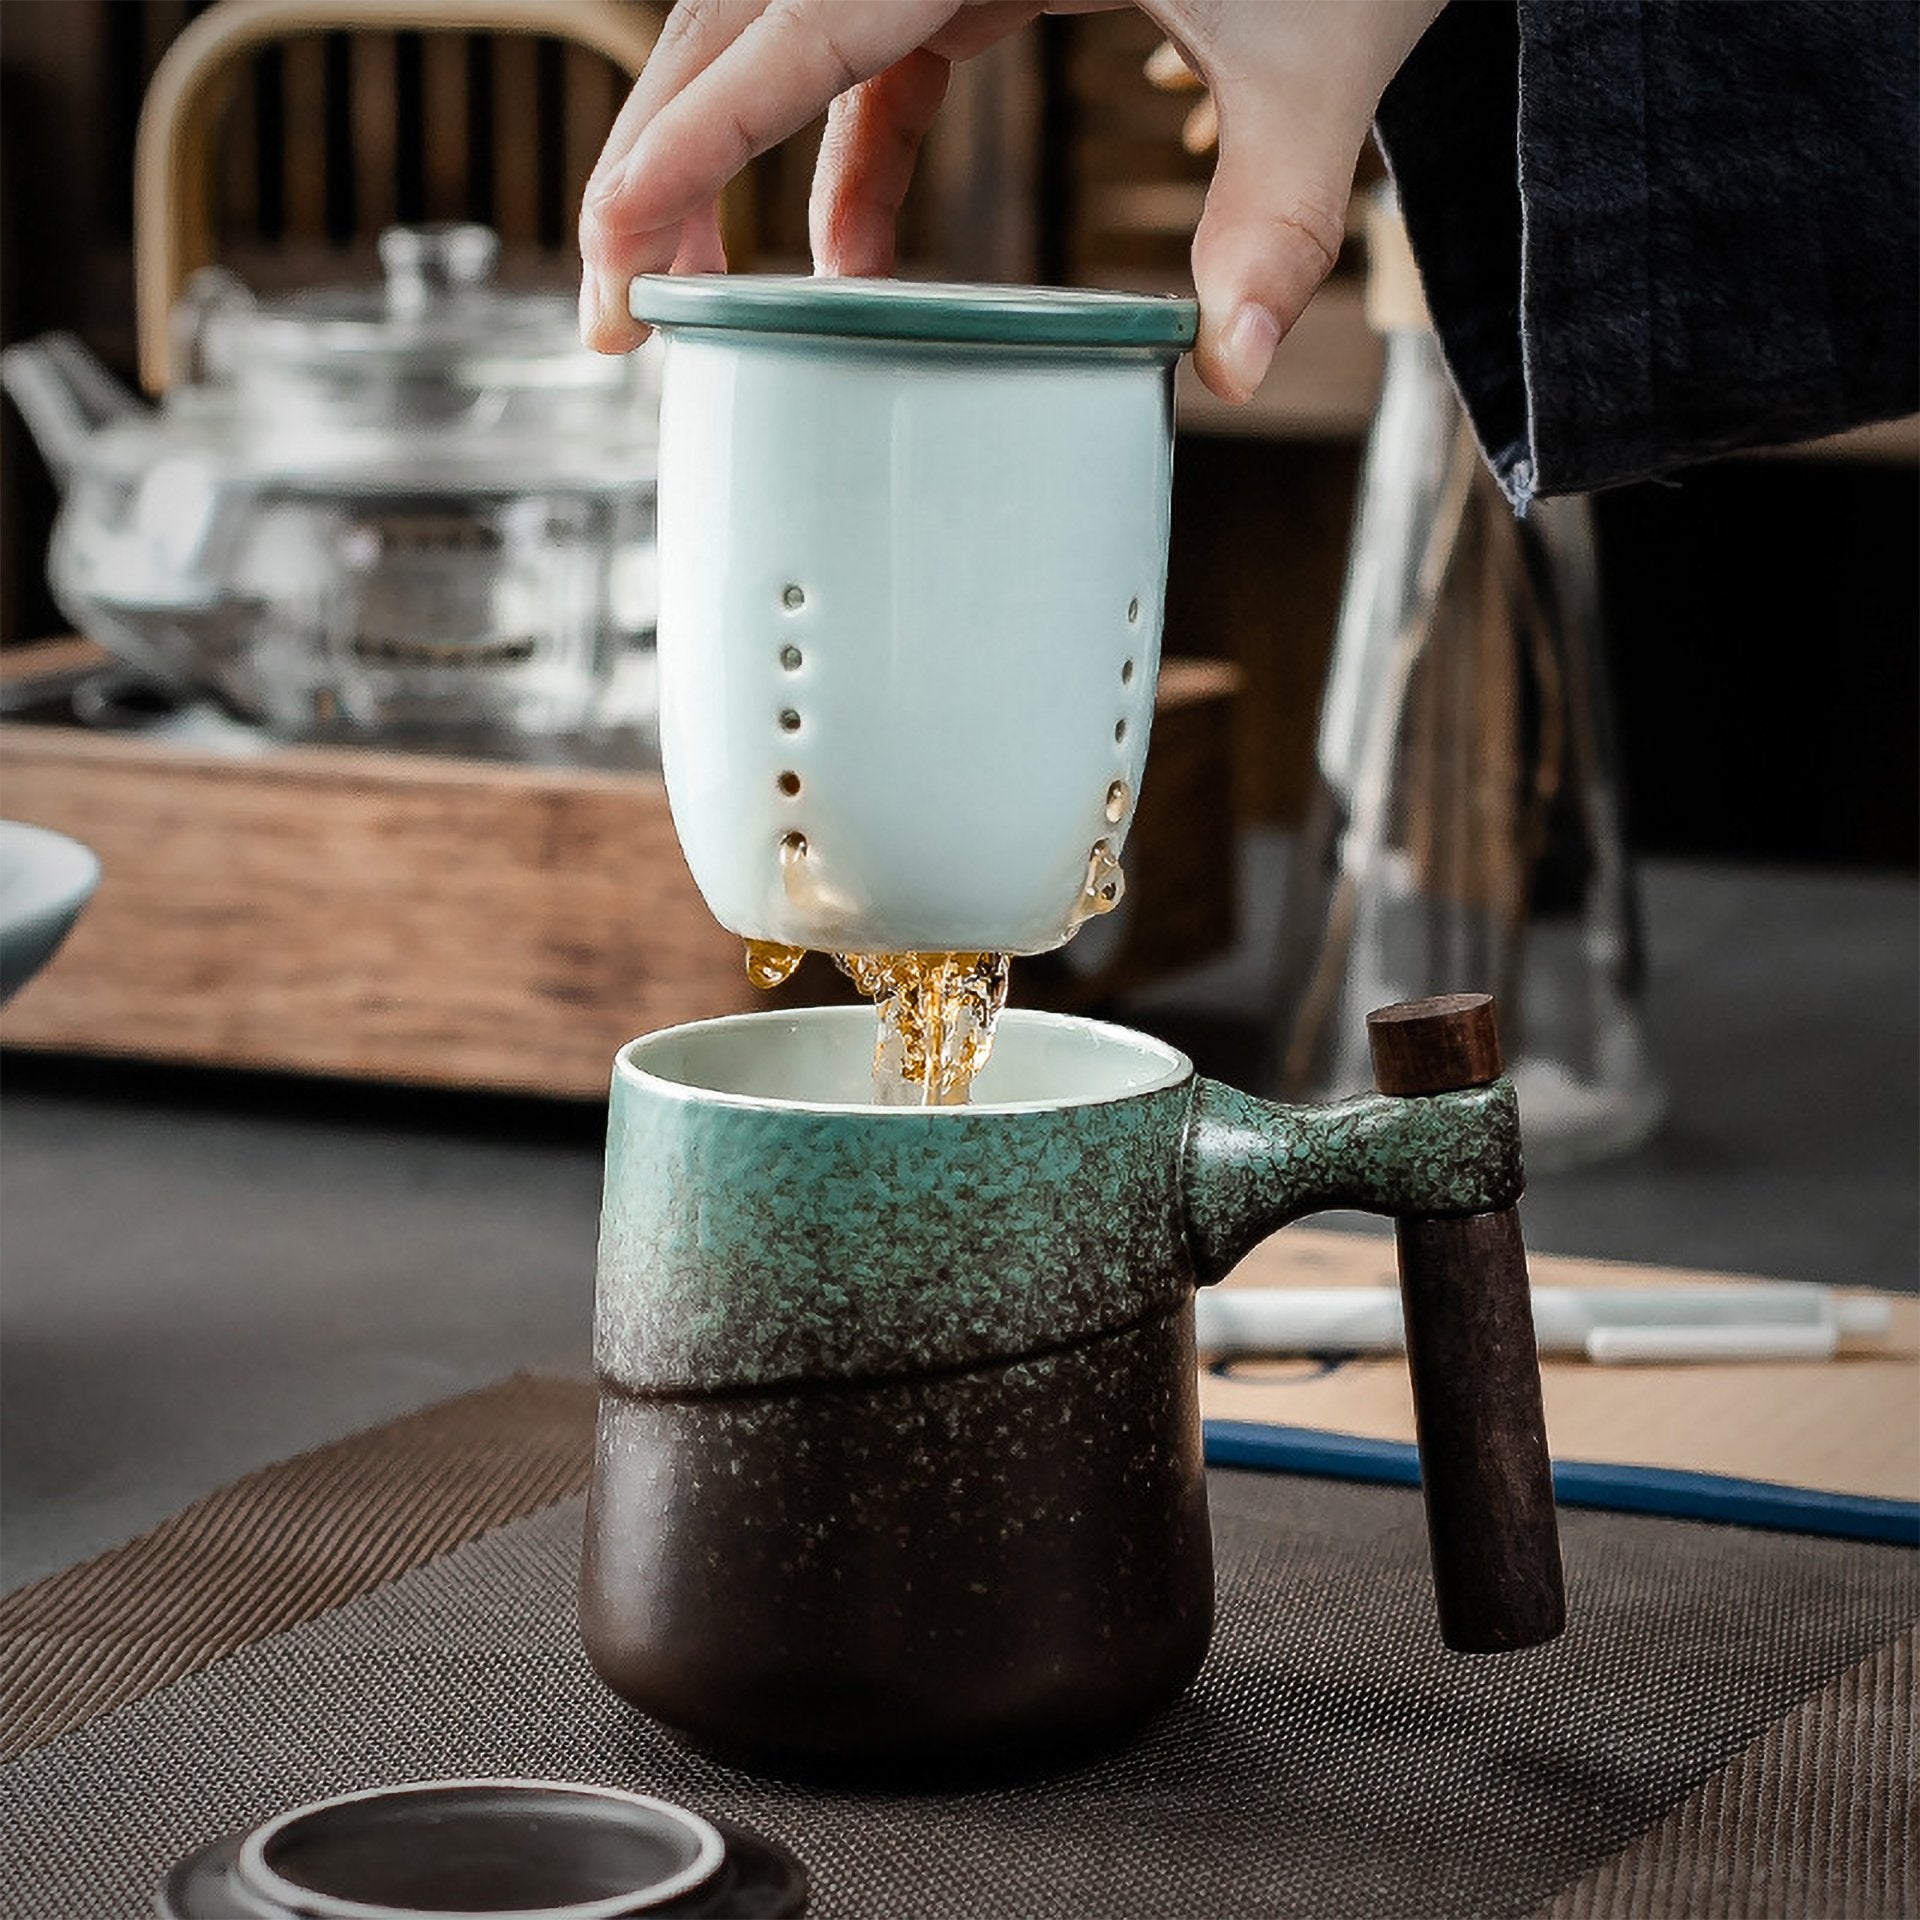 Tea being poured from a ceramic infuser into a matching dark green mug on a textured mat.